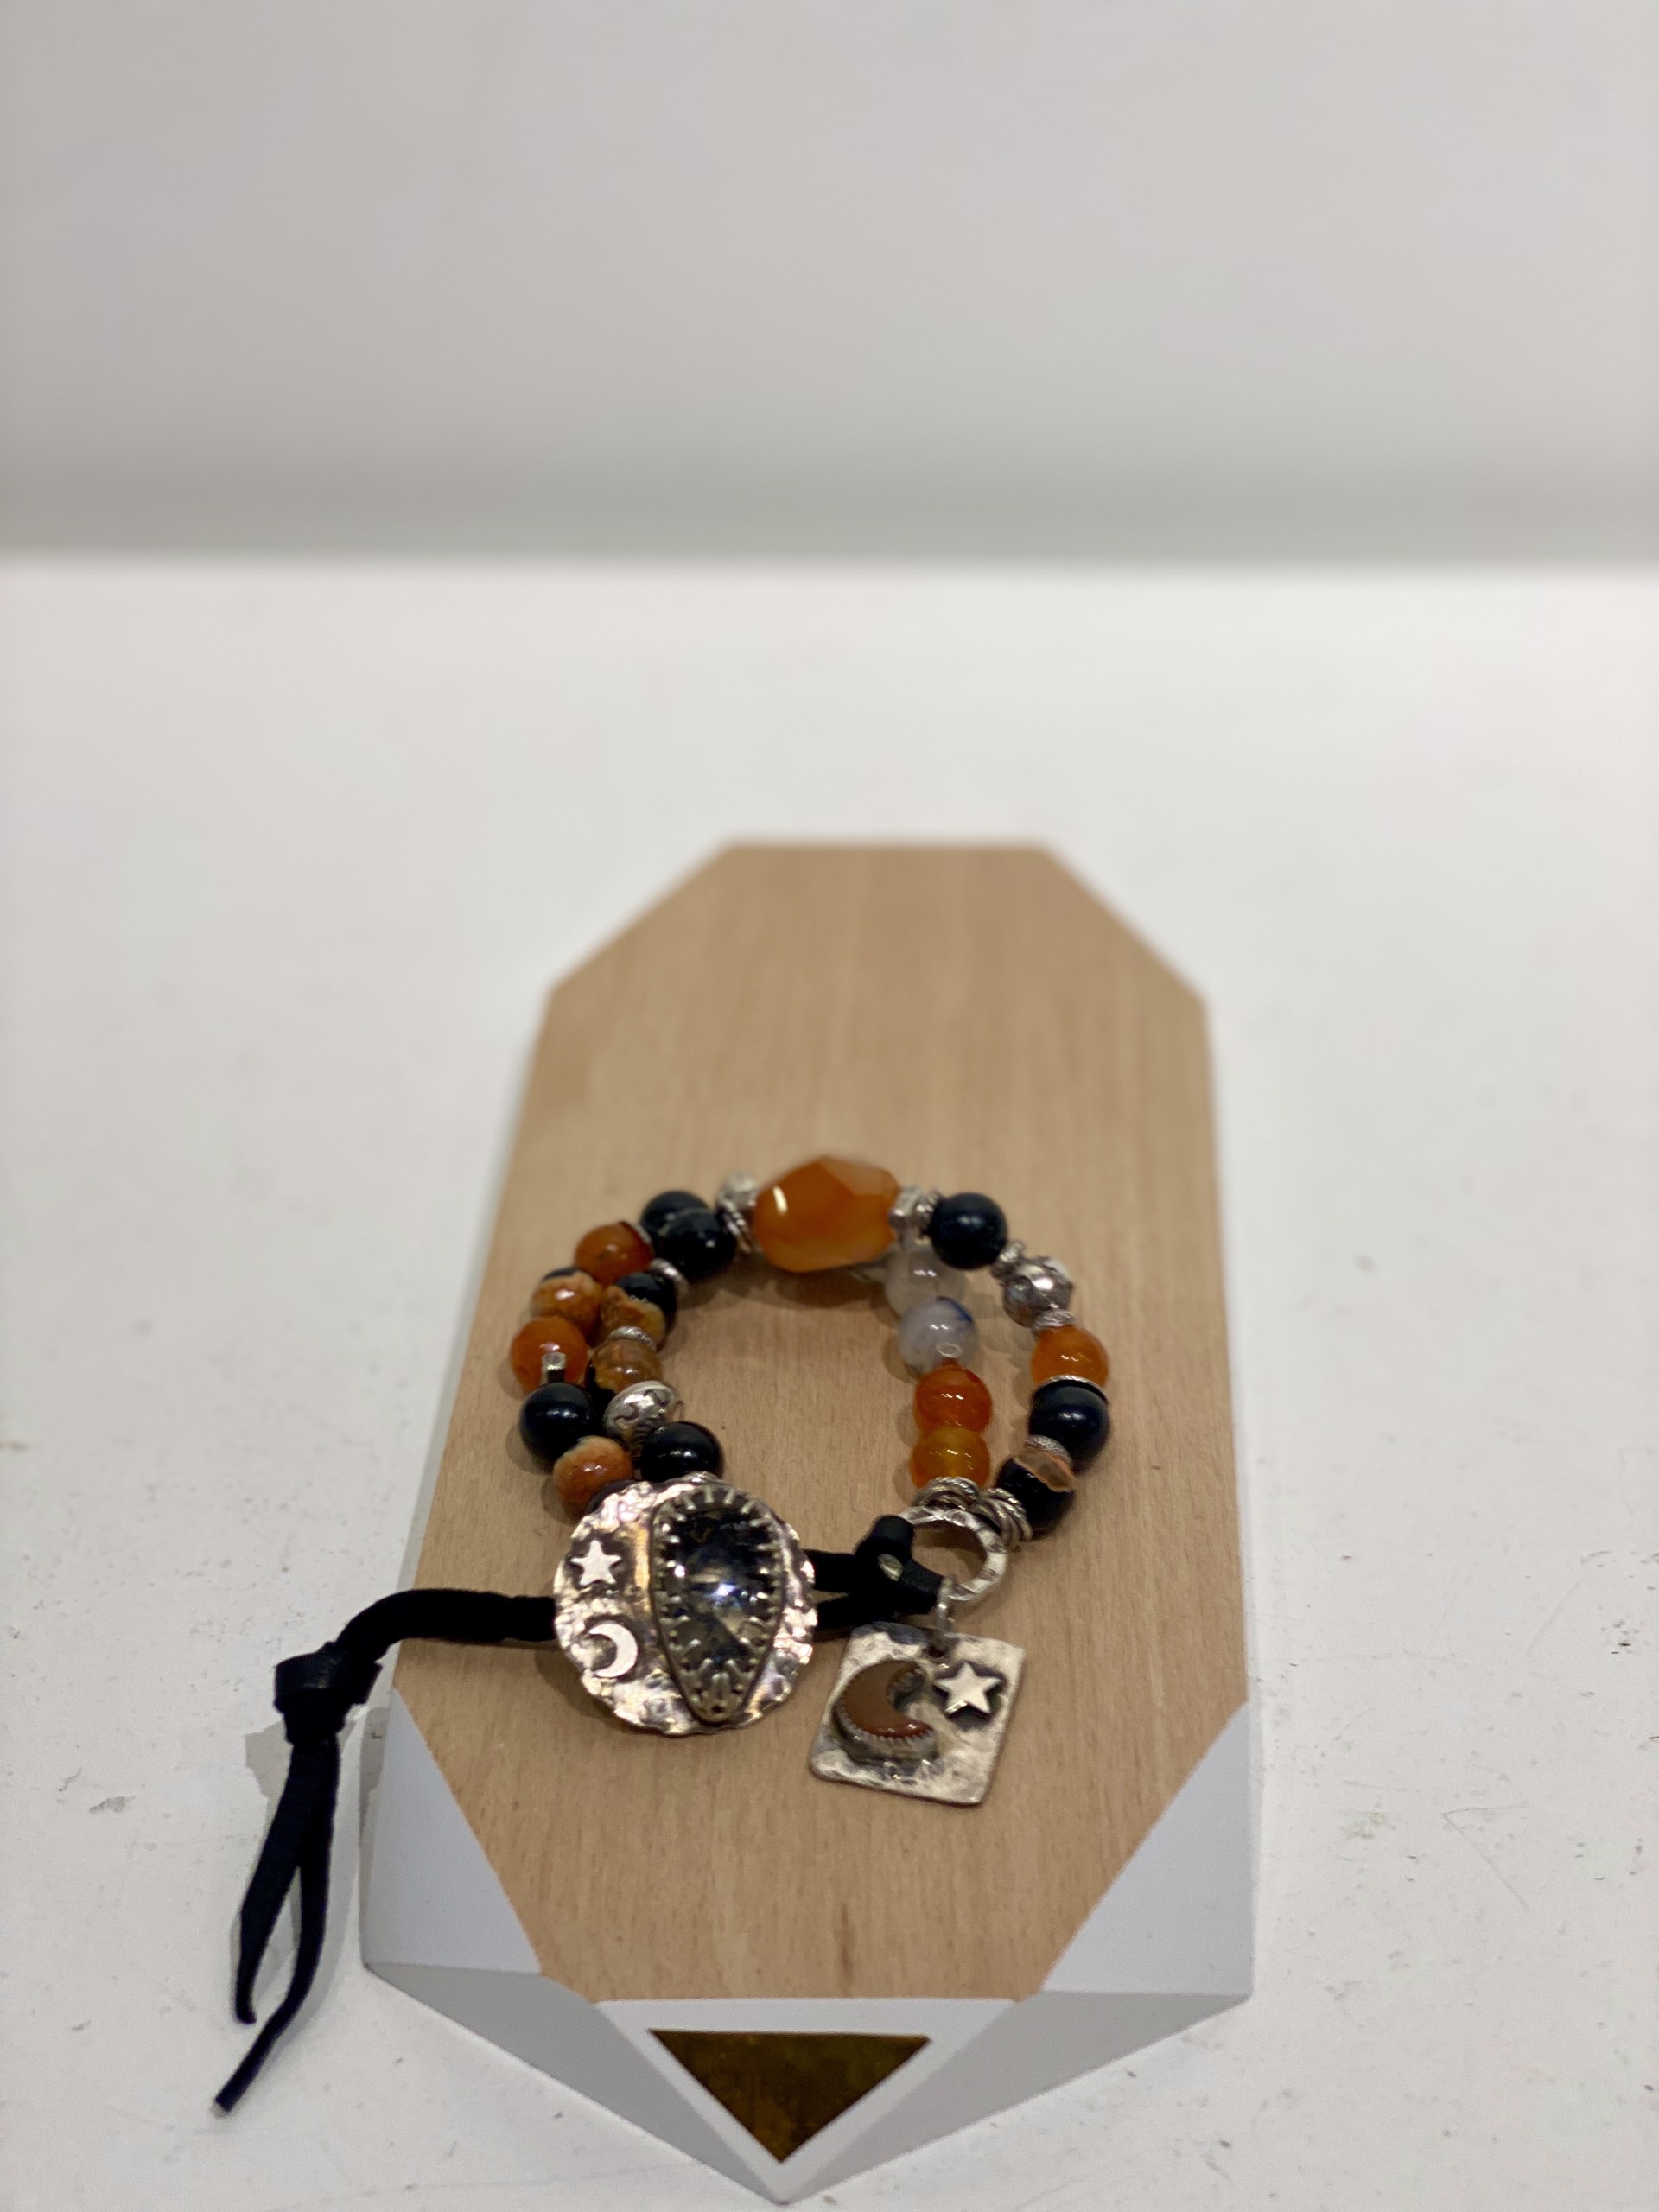 Brazilian Dendritic Agate w/Carnelian beads and charm #18 by Melissa Turney